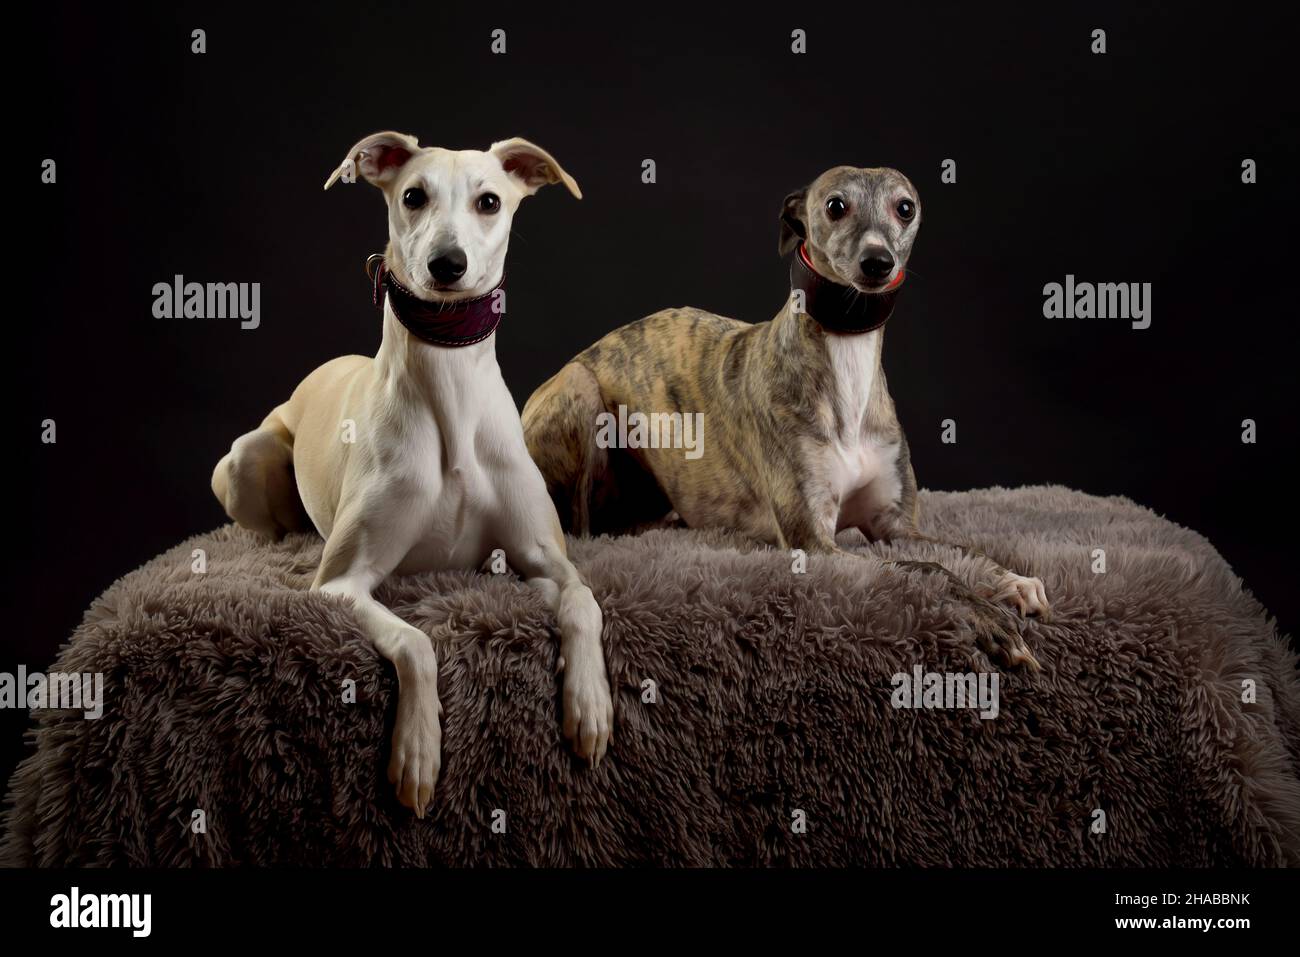 Whippets in the studio. A dog portrait of a two whippet dogs on black background. Stock Photo